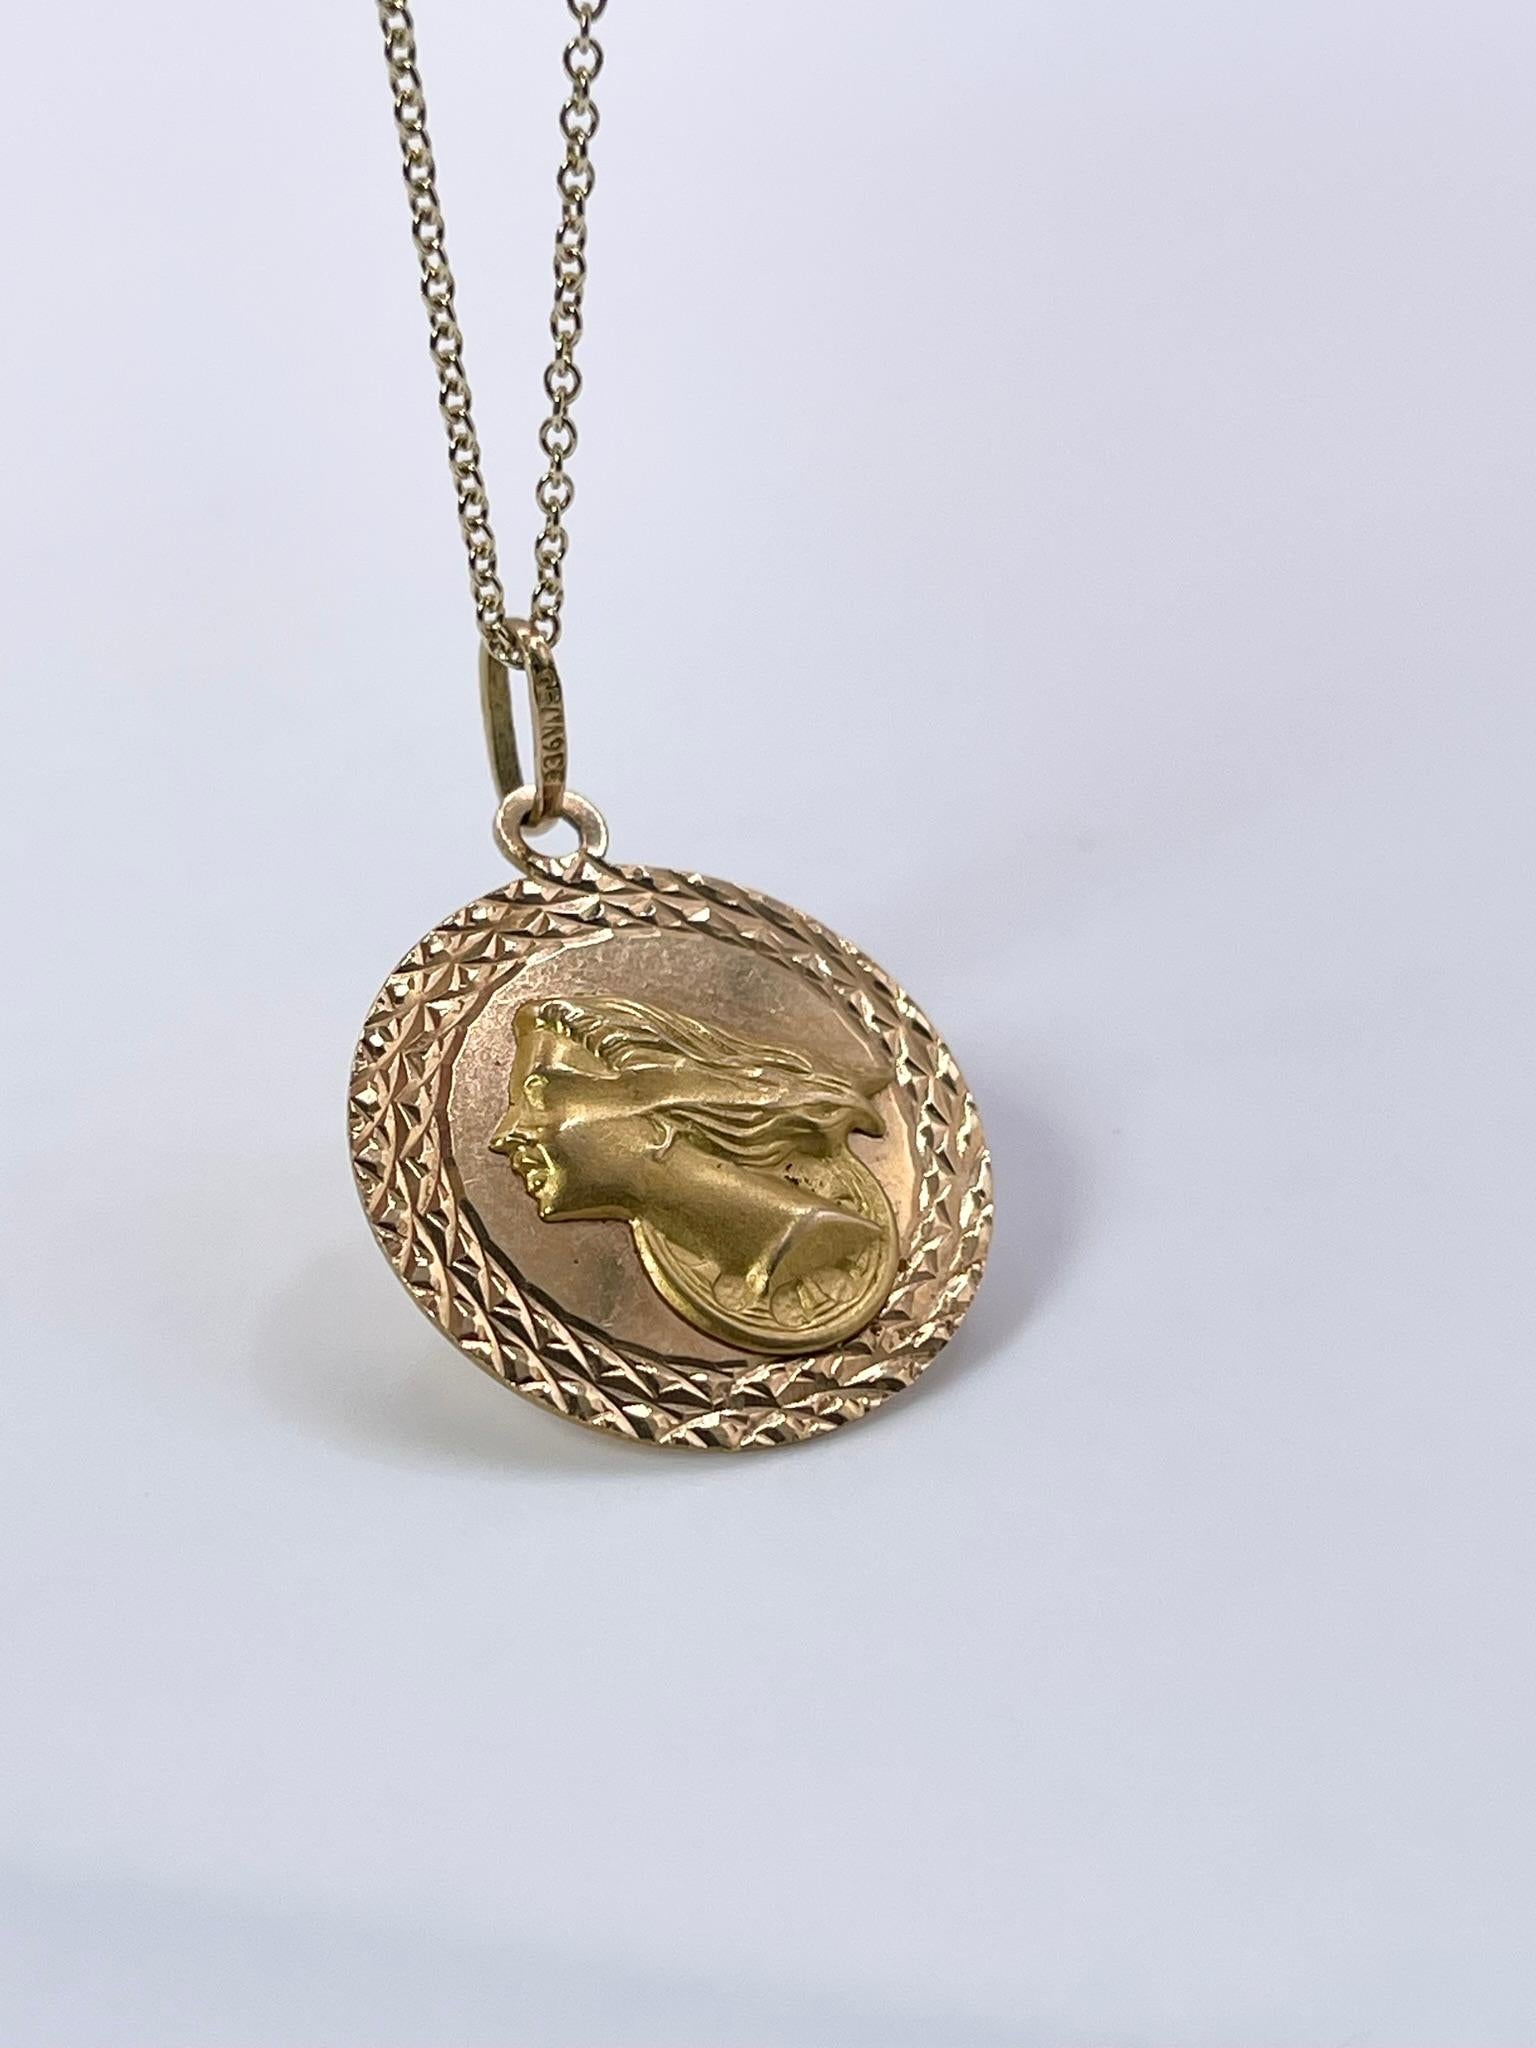 Lady Charm Gold Pendant Necklace Head Charm Head Pendant Necklace 18KT Yellow  In Excellent Condition For Sale In Jupiter, FL